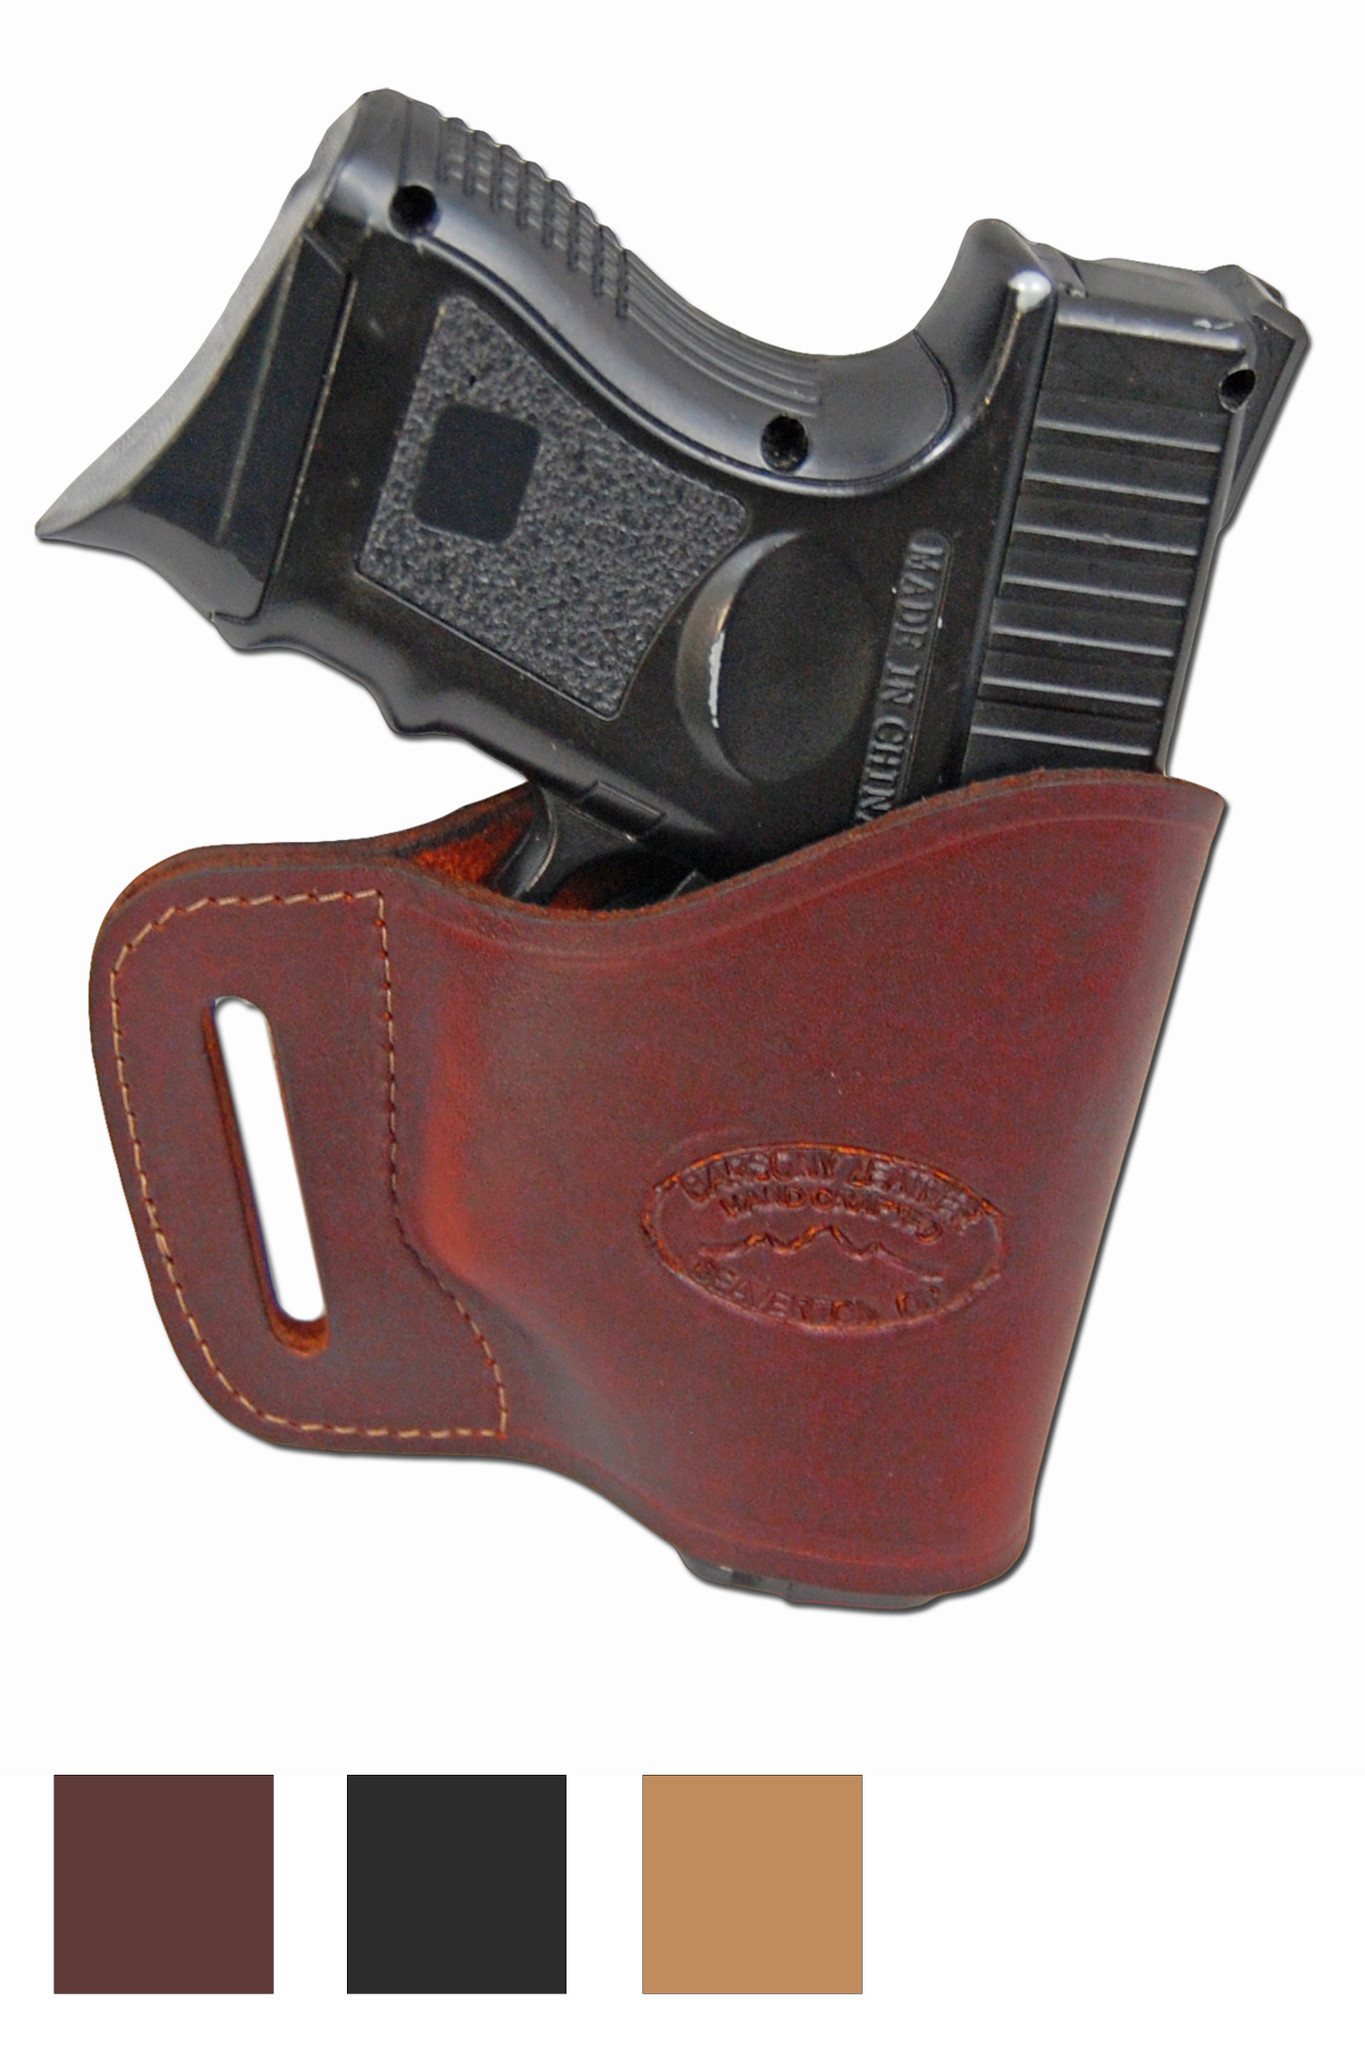 New Barsony Burgundy Leather Pancake Gun Holster for S&W M&P Compact 9mm 40 45 